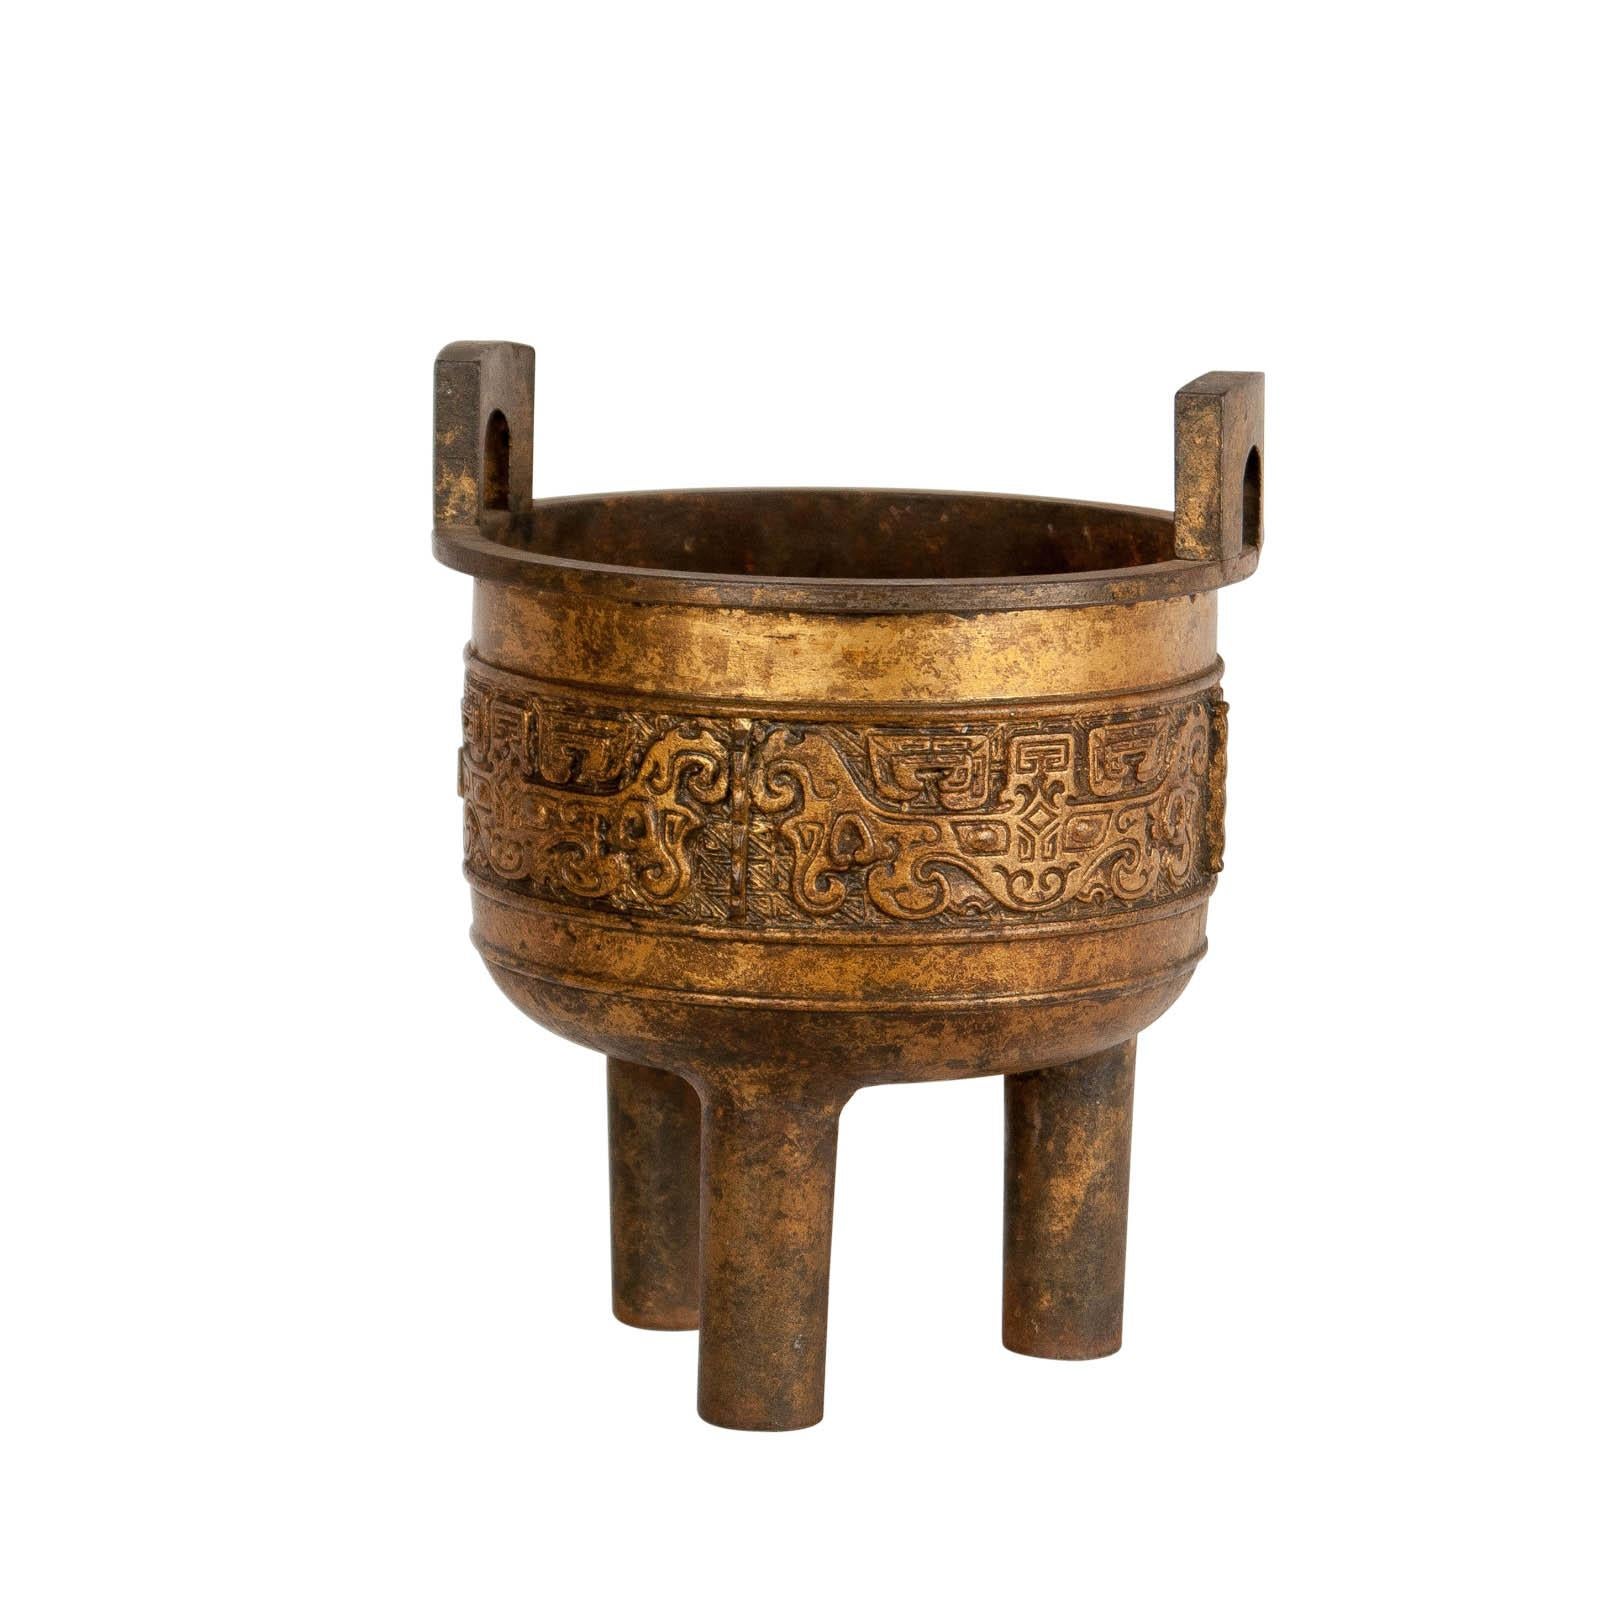 A Chinese ding or censer in the Archaic style made of iron with gilding, circa 1900.